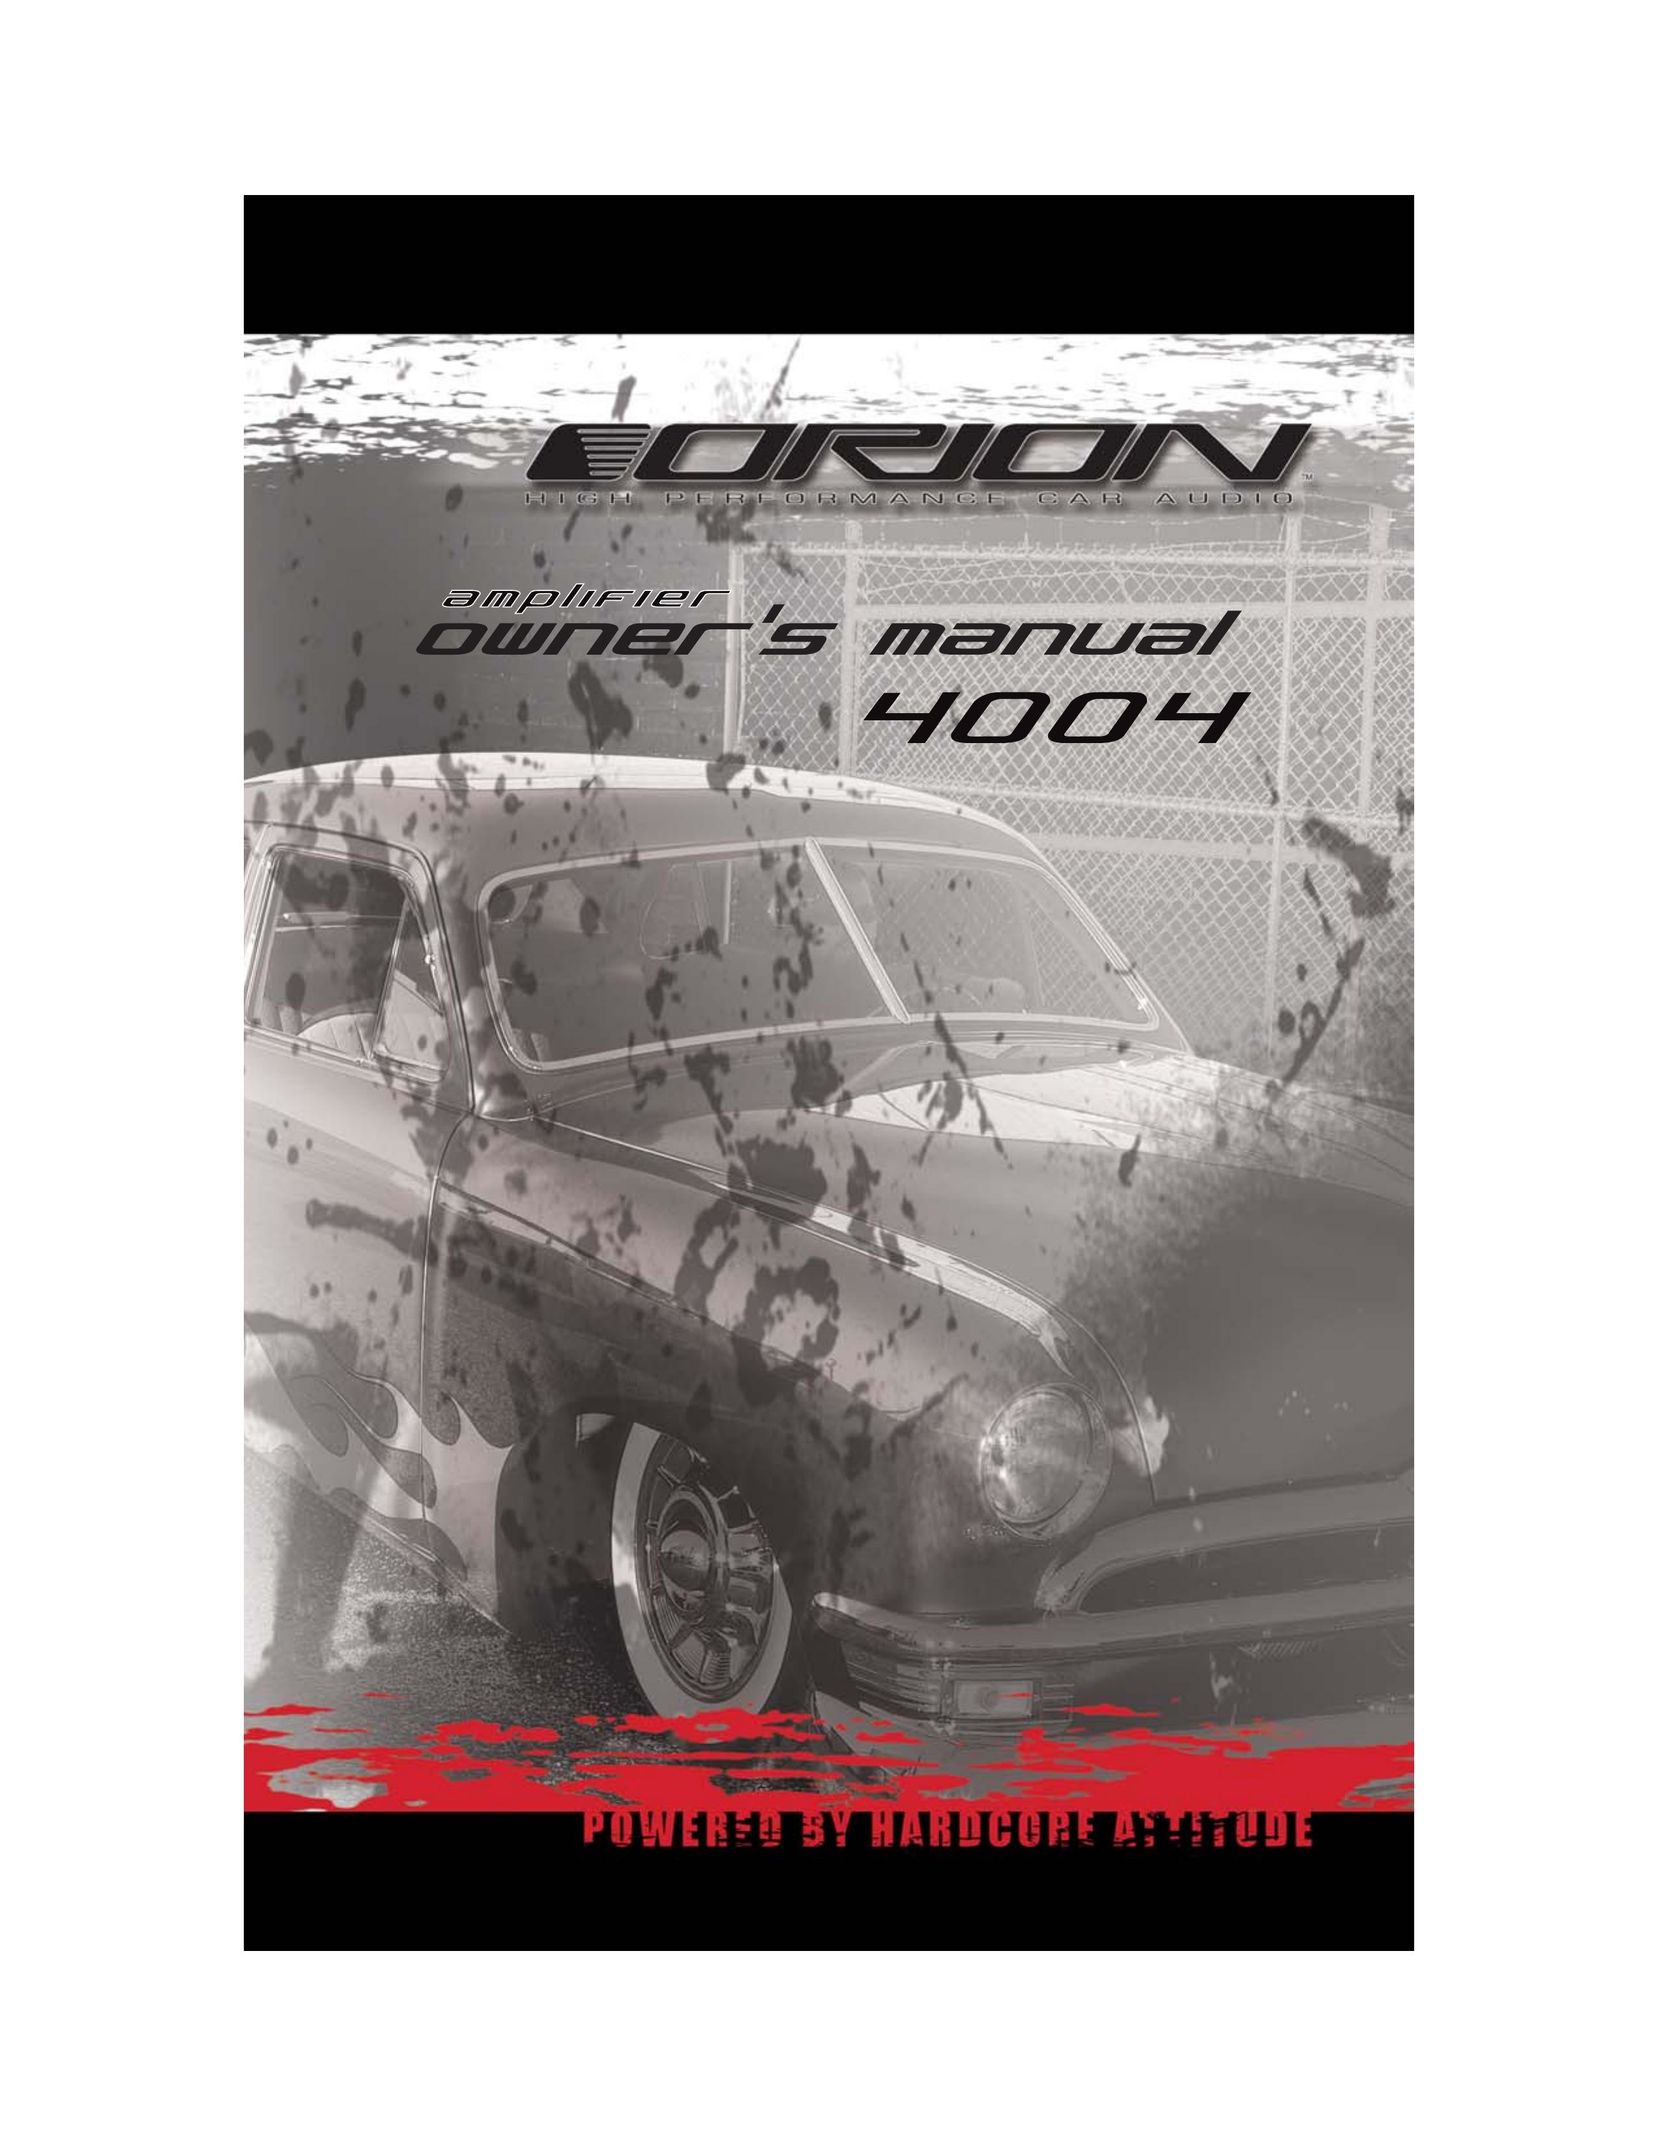 Orion Car Audio 4004 Stereo Amplifier User Manual